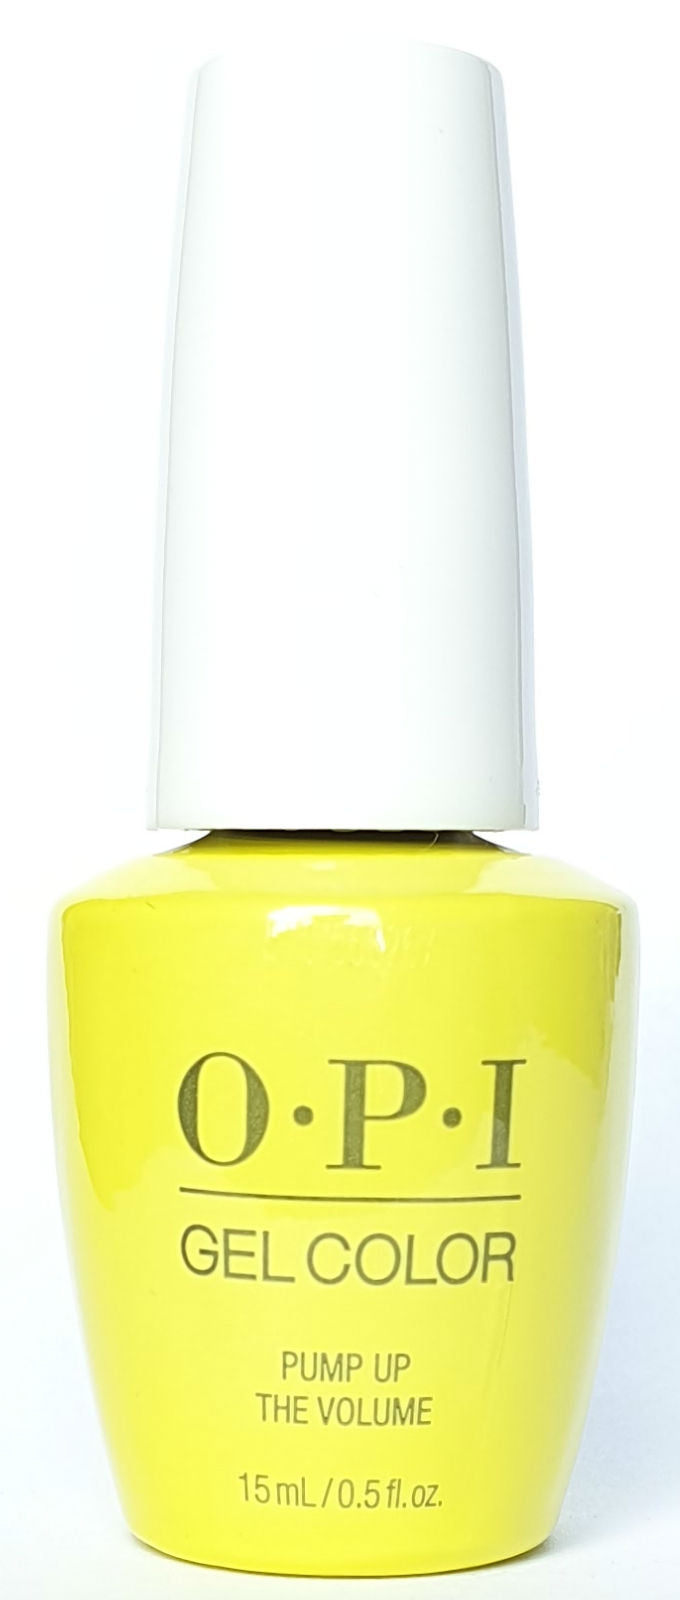 Pump Up The Volume * OPI Gelcolor